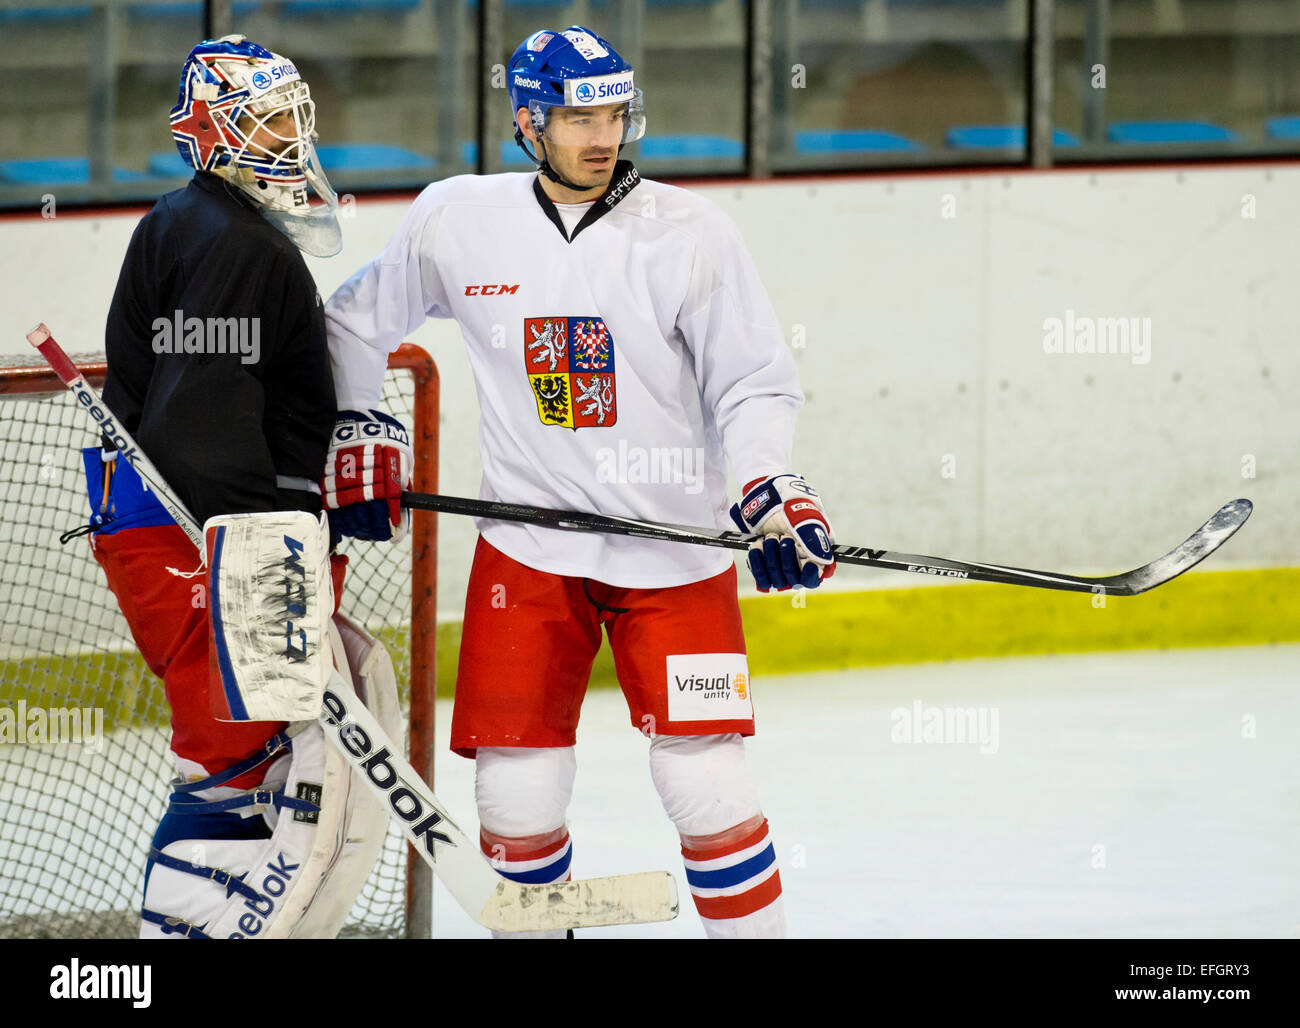 Goalkeeper Alexander Salak and Jan Kolar, new players of Czech National Ice Hockey Team, are seen during the training session of Czech team in Prague, Czech Republic, February 4, 2015, prior to the Euro Hockey Tour match against Russia. (CTK Photo/Vit Simanek) Stock Photo